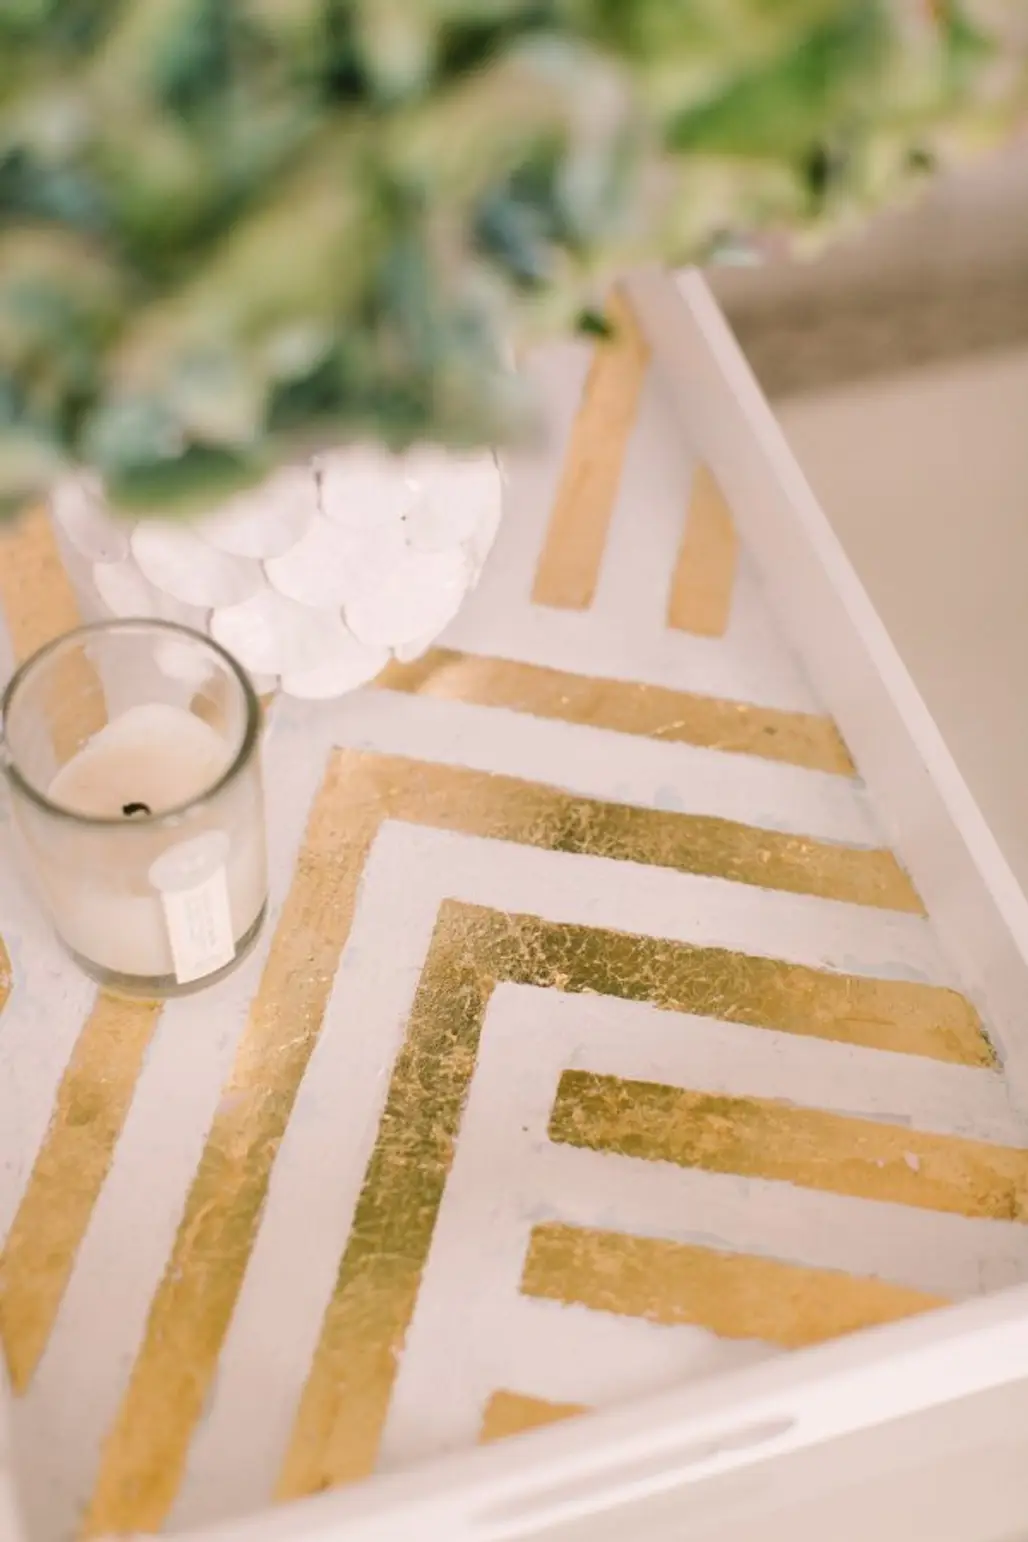 Make Serving Special with a DIY Gold Tray